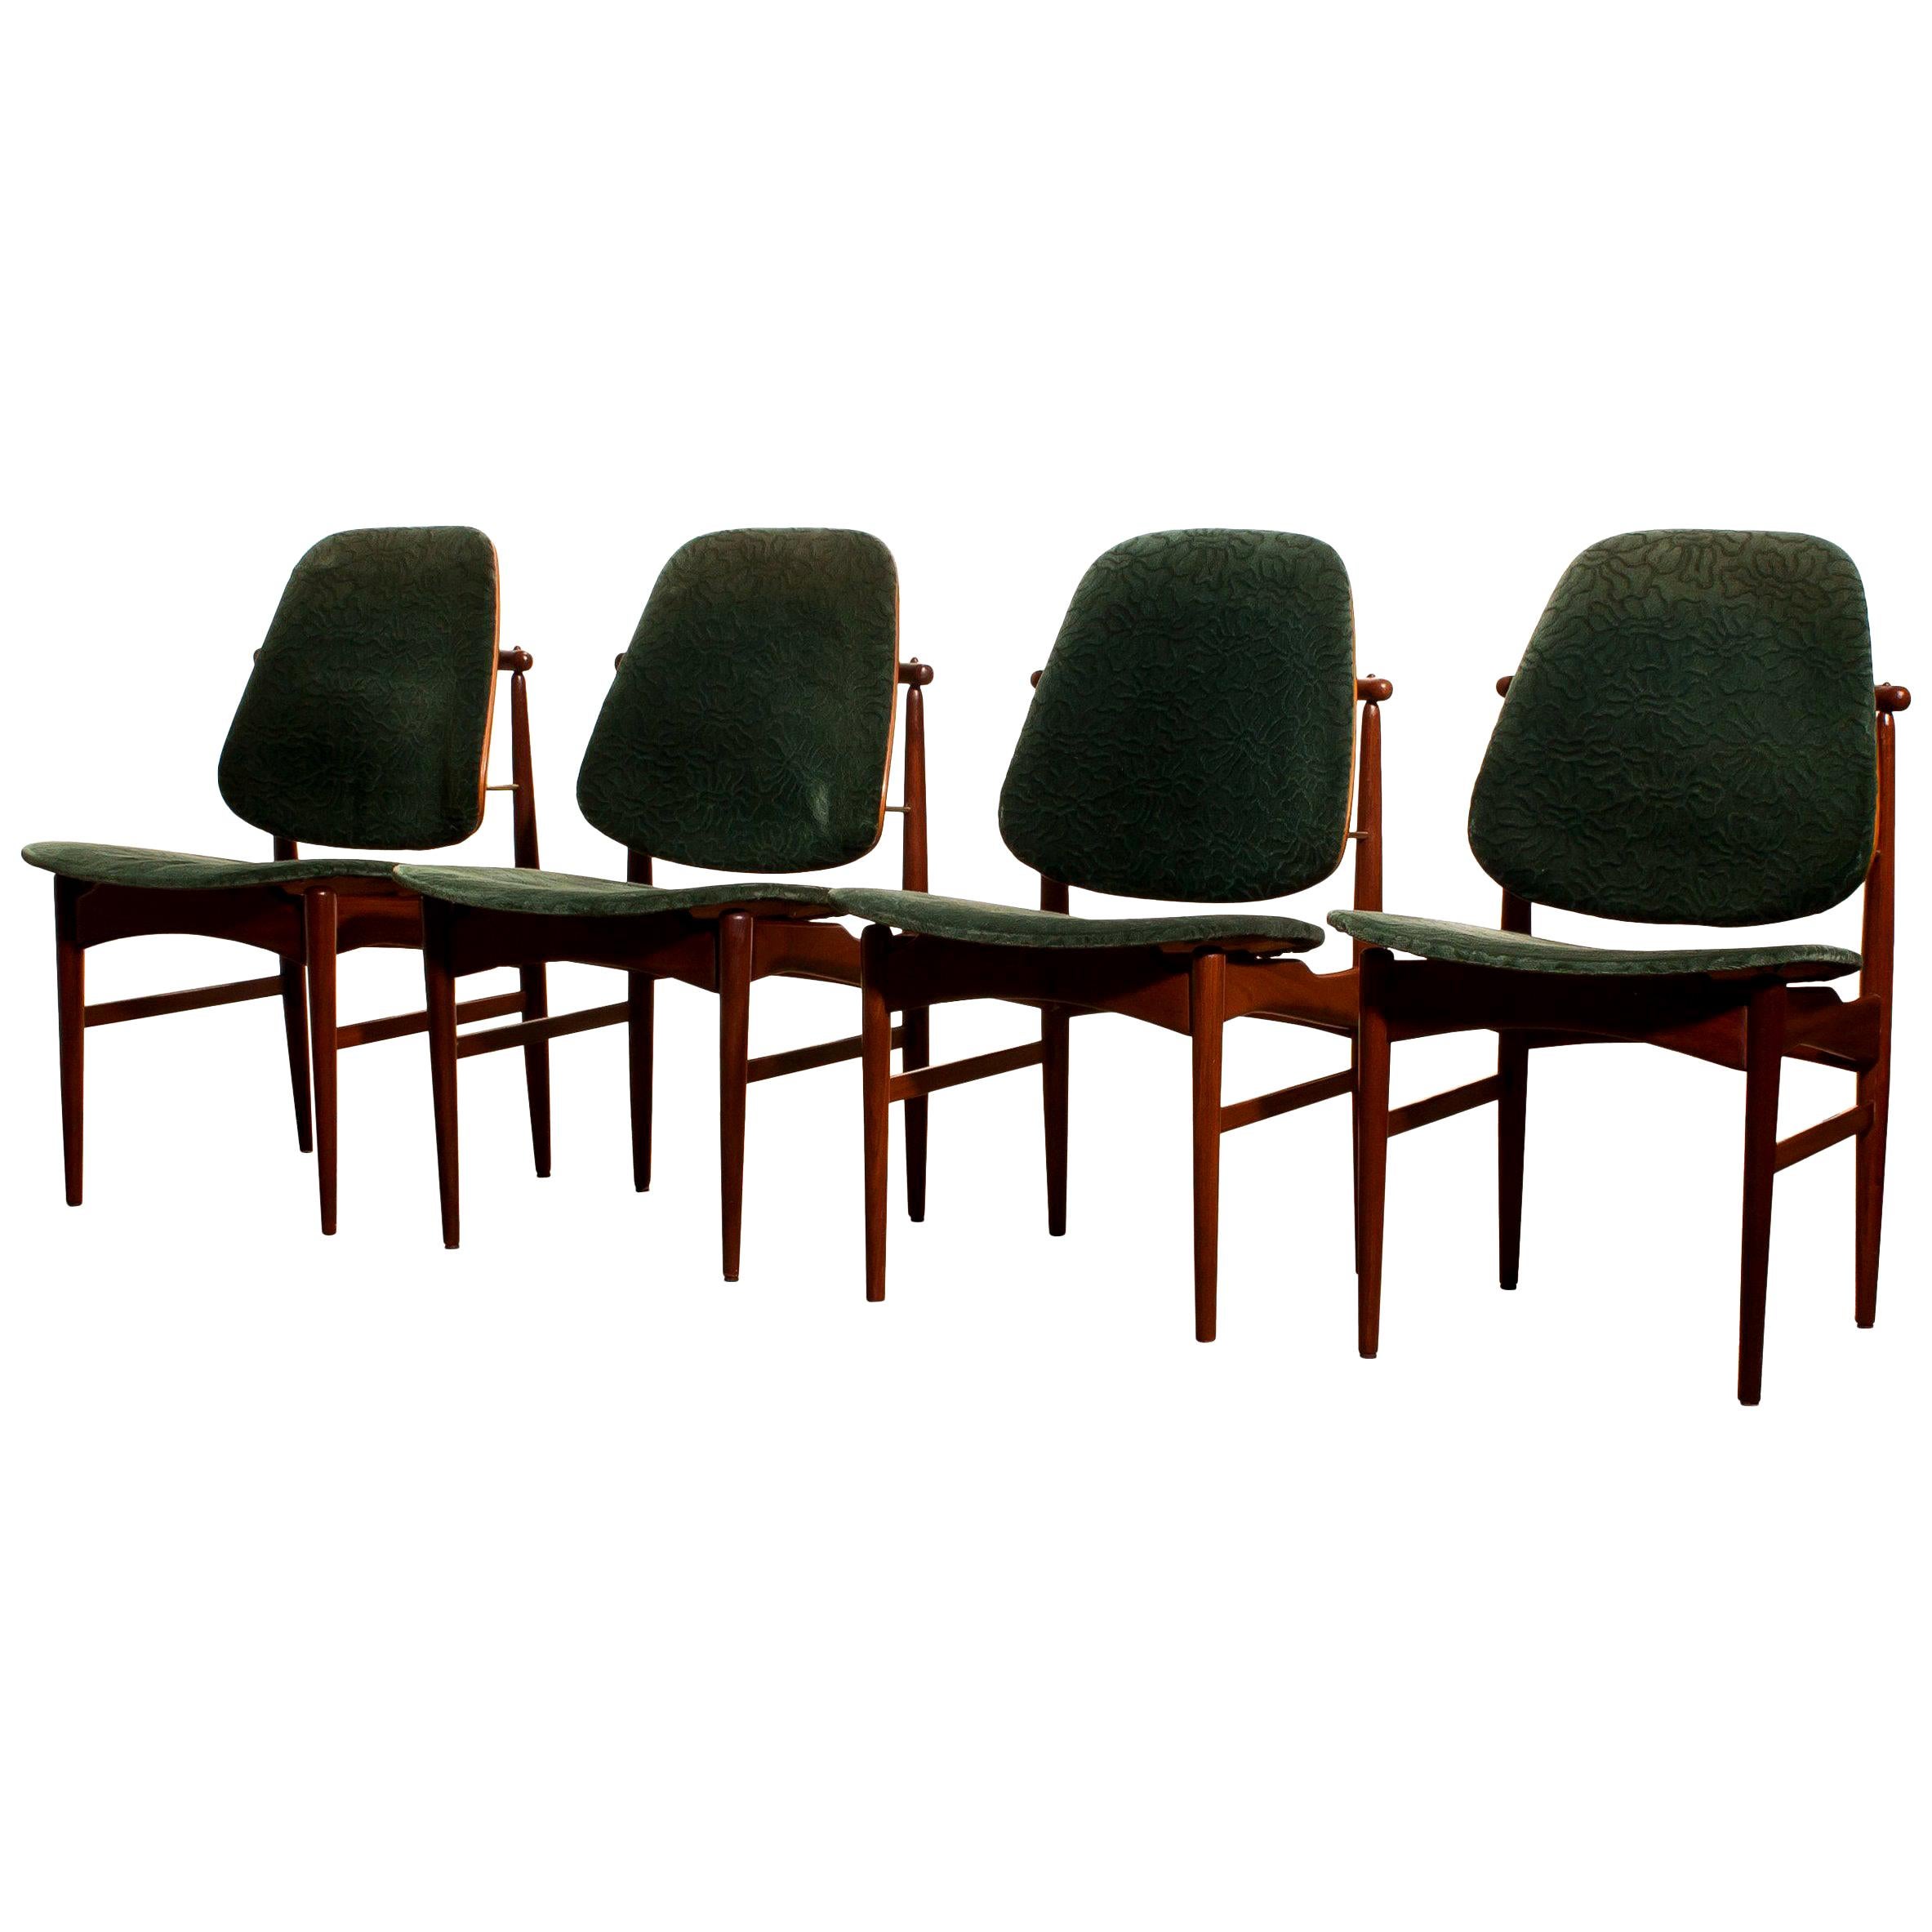 Beautiful set of four Arne Vodder design armchairs made by France & Daverkosen, Denmark.
The (original) fabric needs to be replaced!
These chairs sit extremely comfortable and are beautifully finished with beautiful bronze details.
The teak